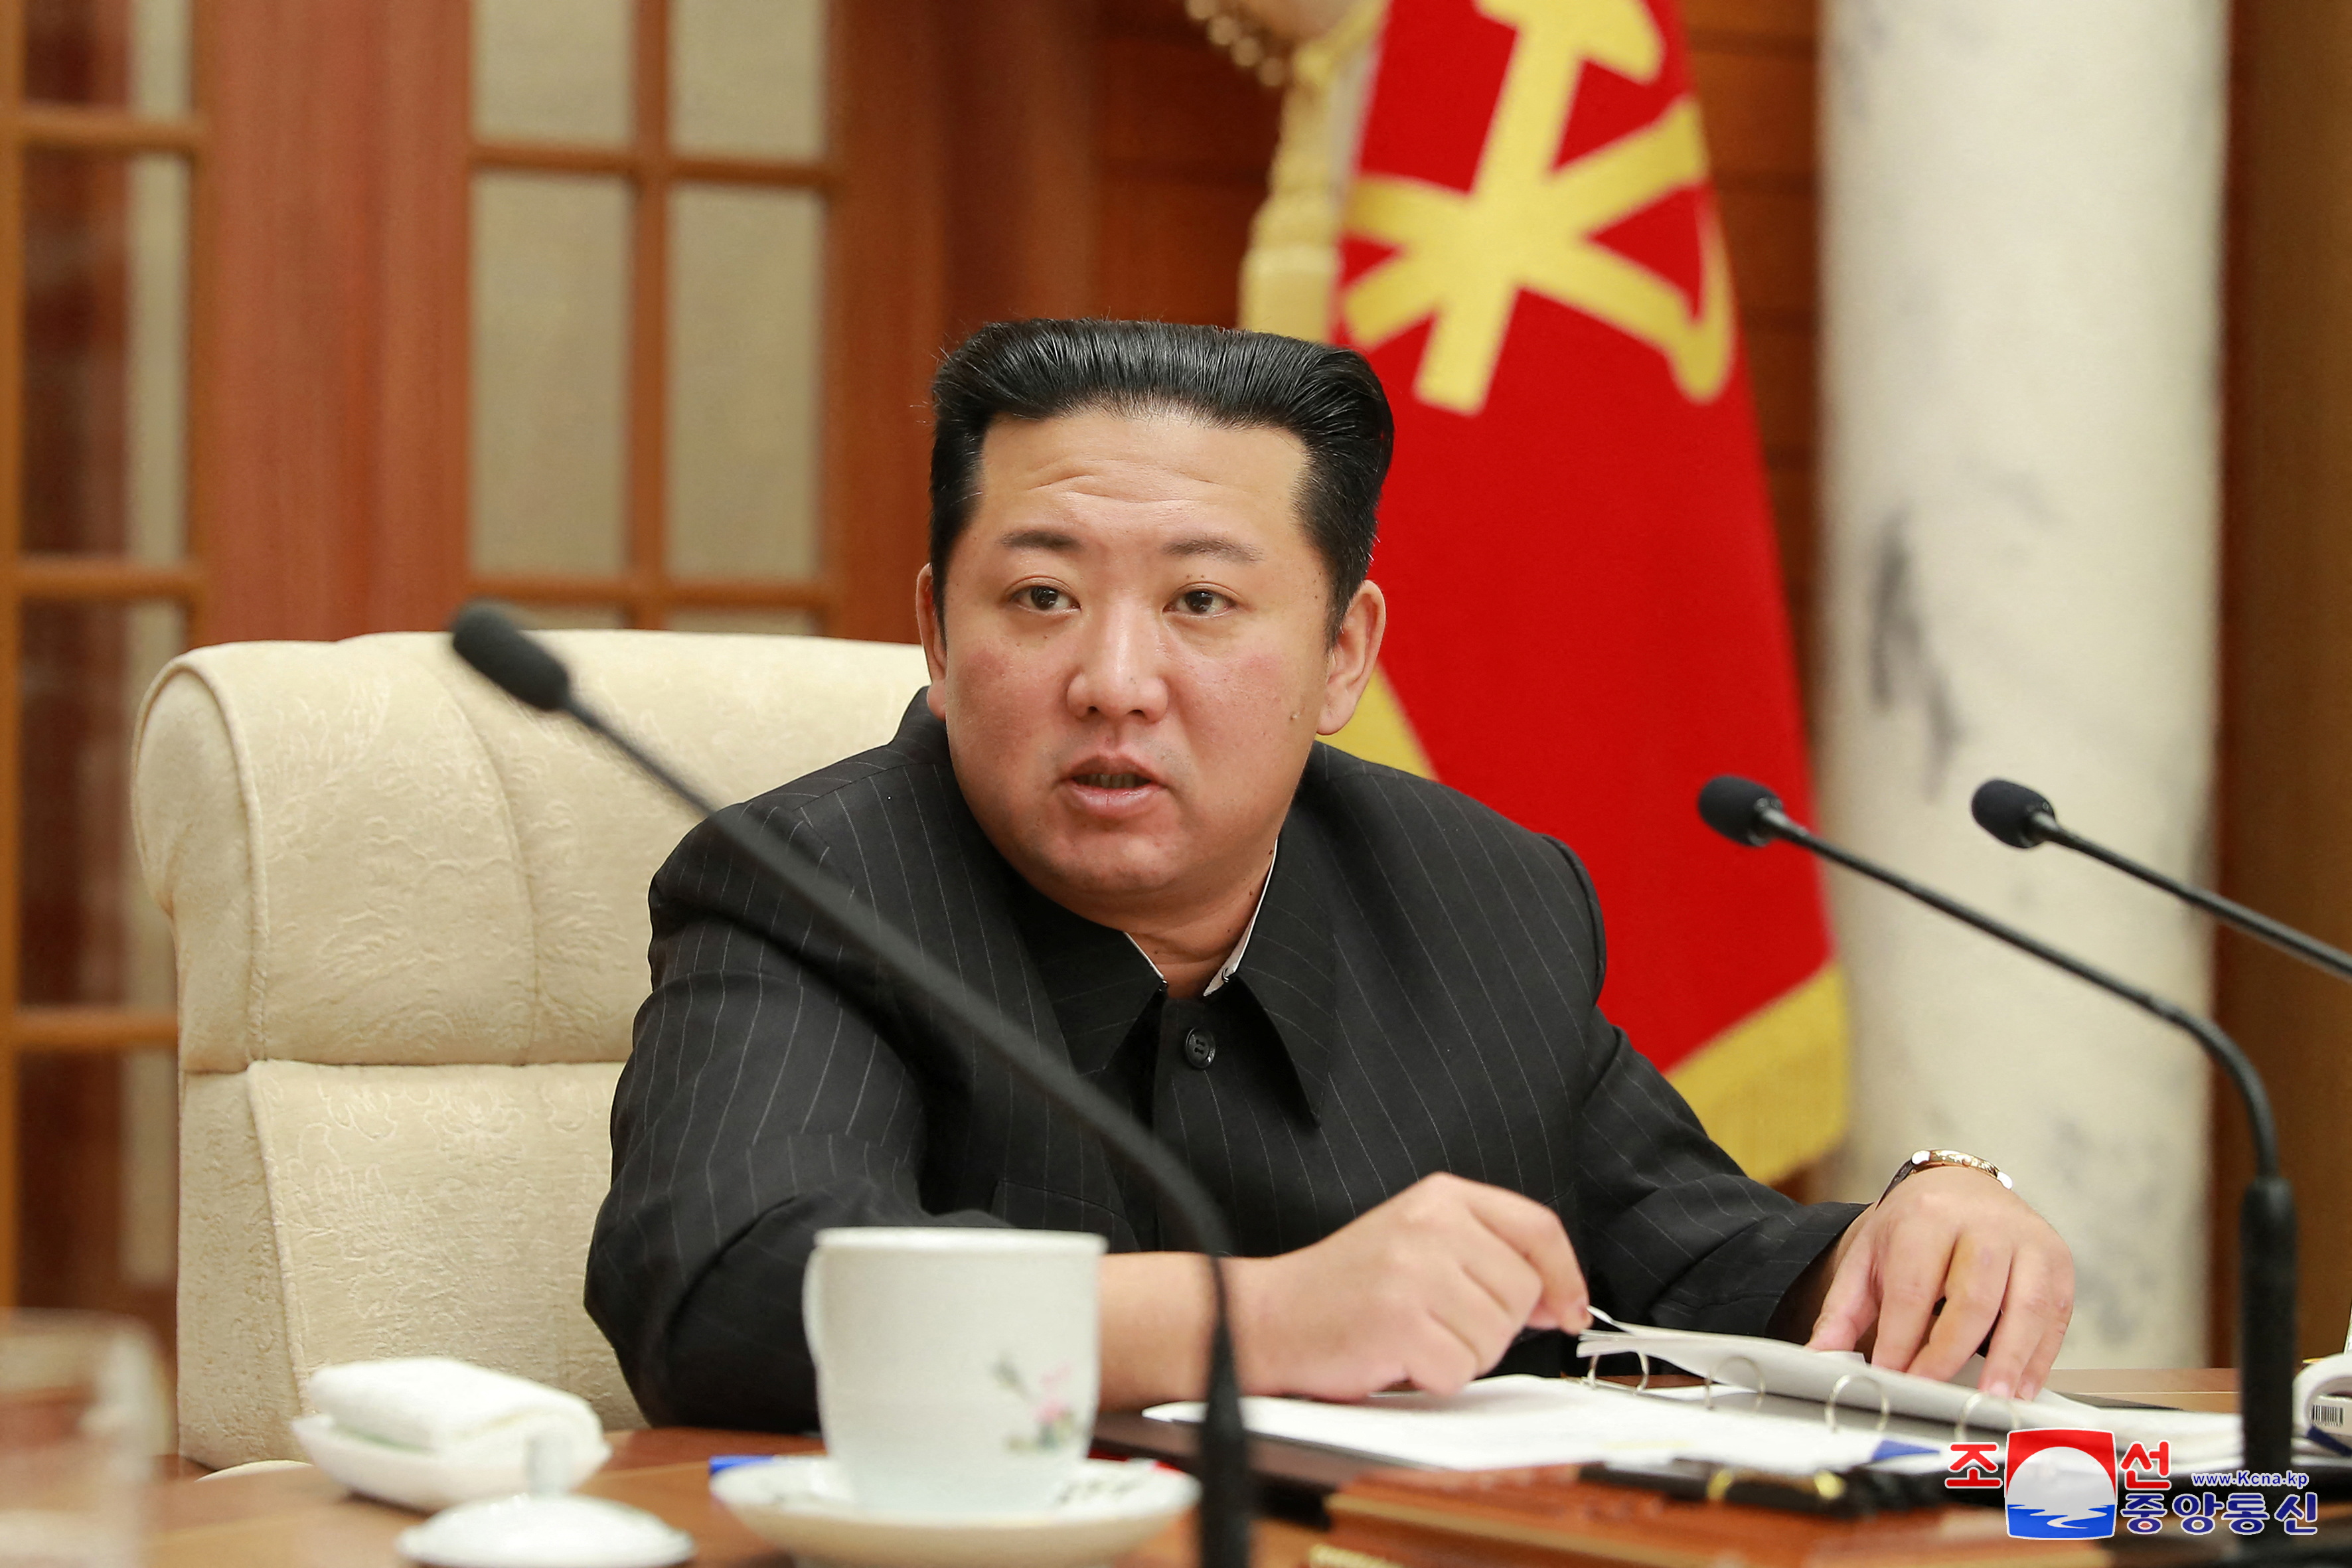 North Korean leader Kim Jong Un attends a meeting of the politburo of the ruling Workers' Party in Pyongyang